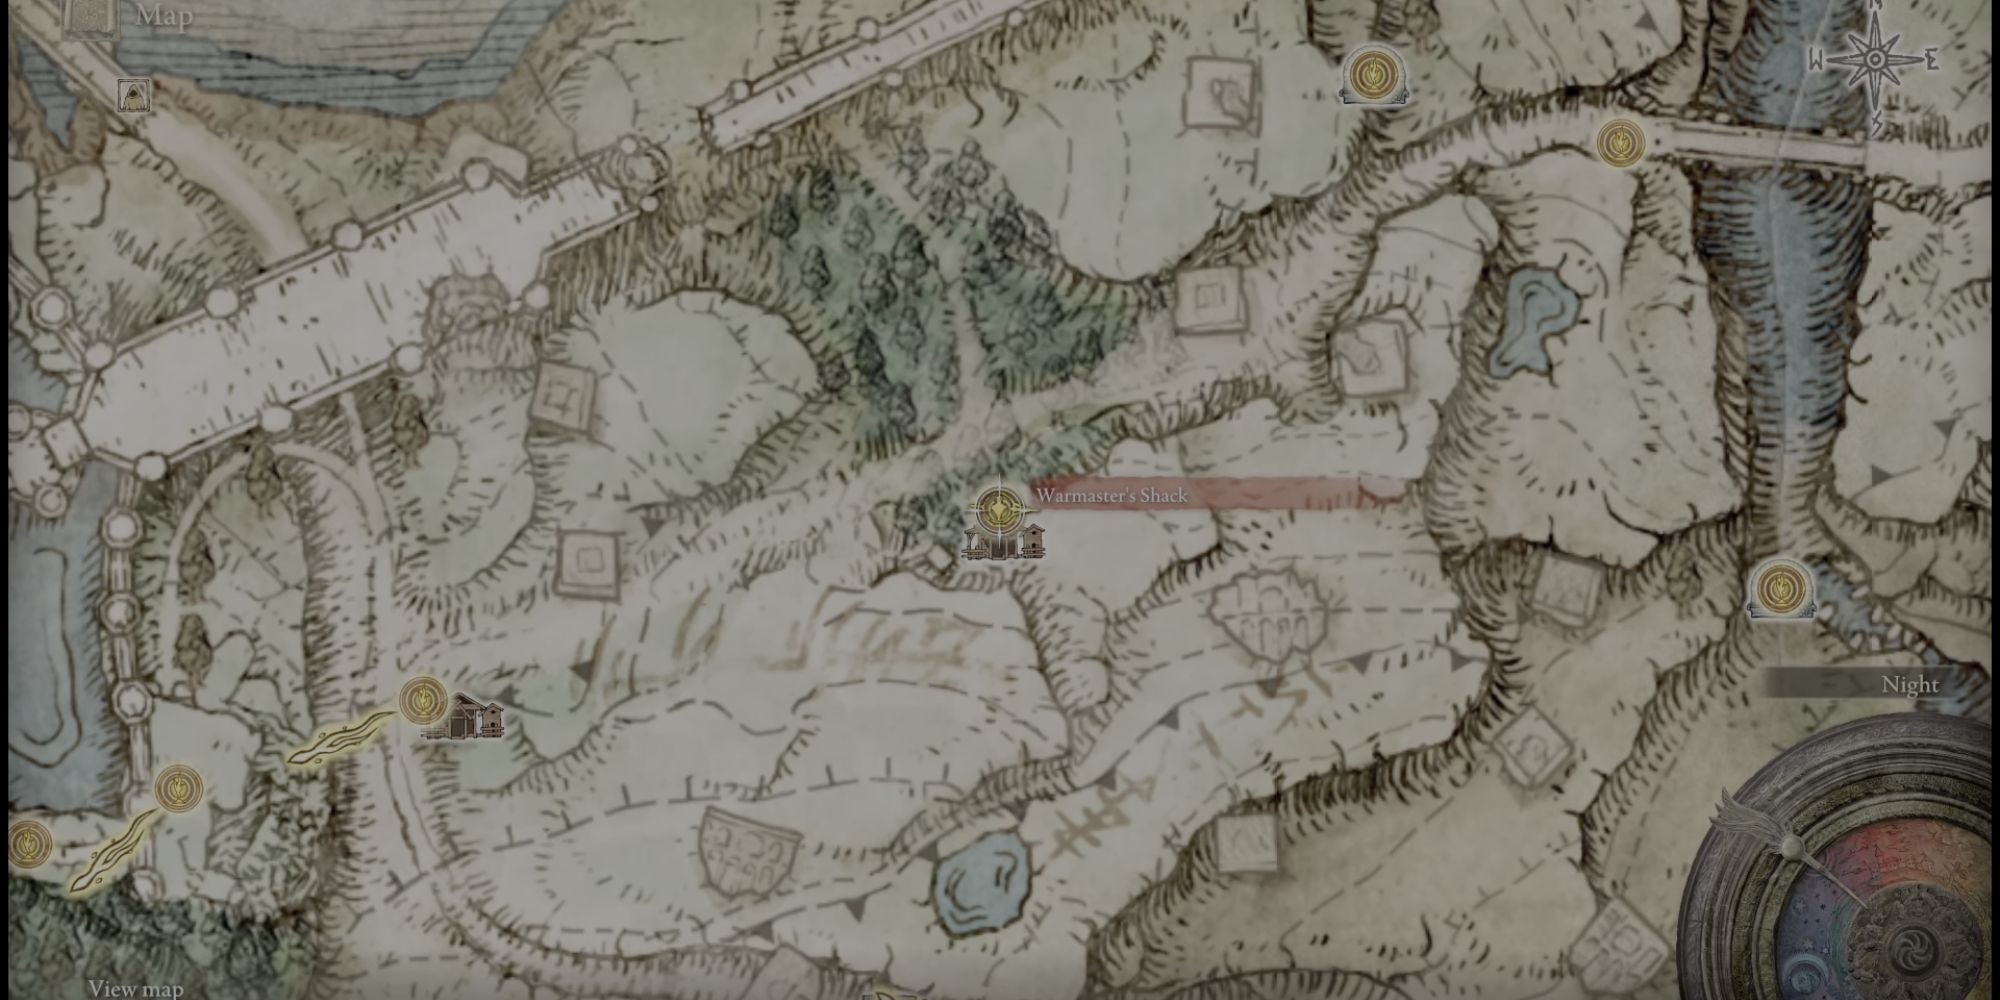  Warmaster’s Shack Site of Grace on the elden ring map